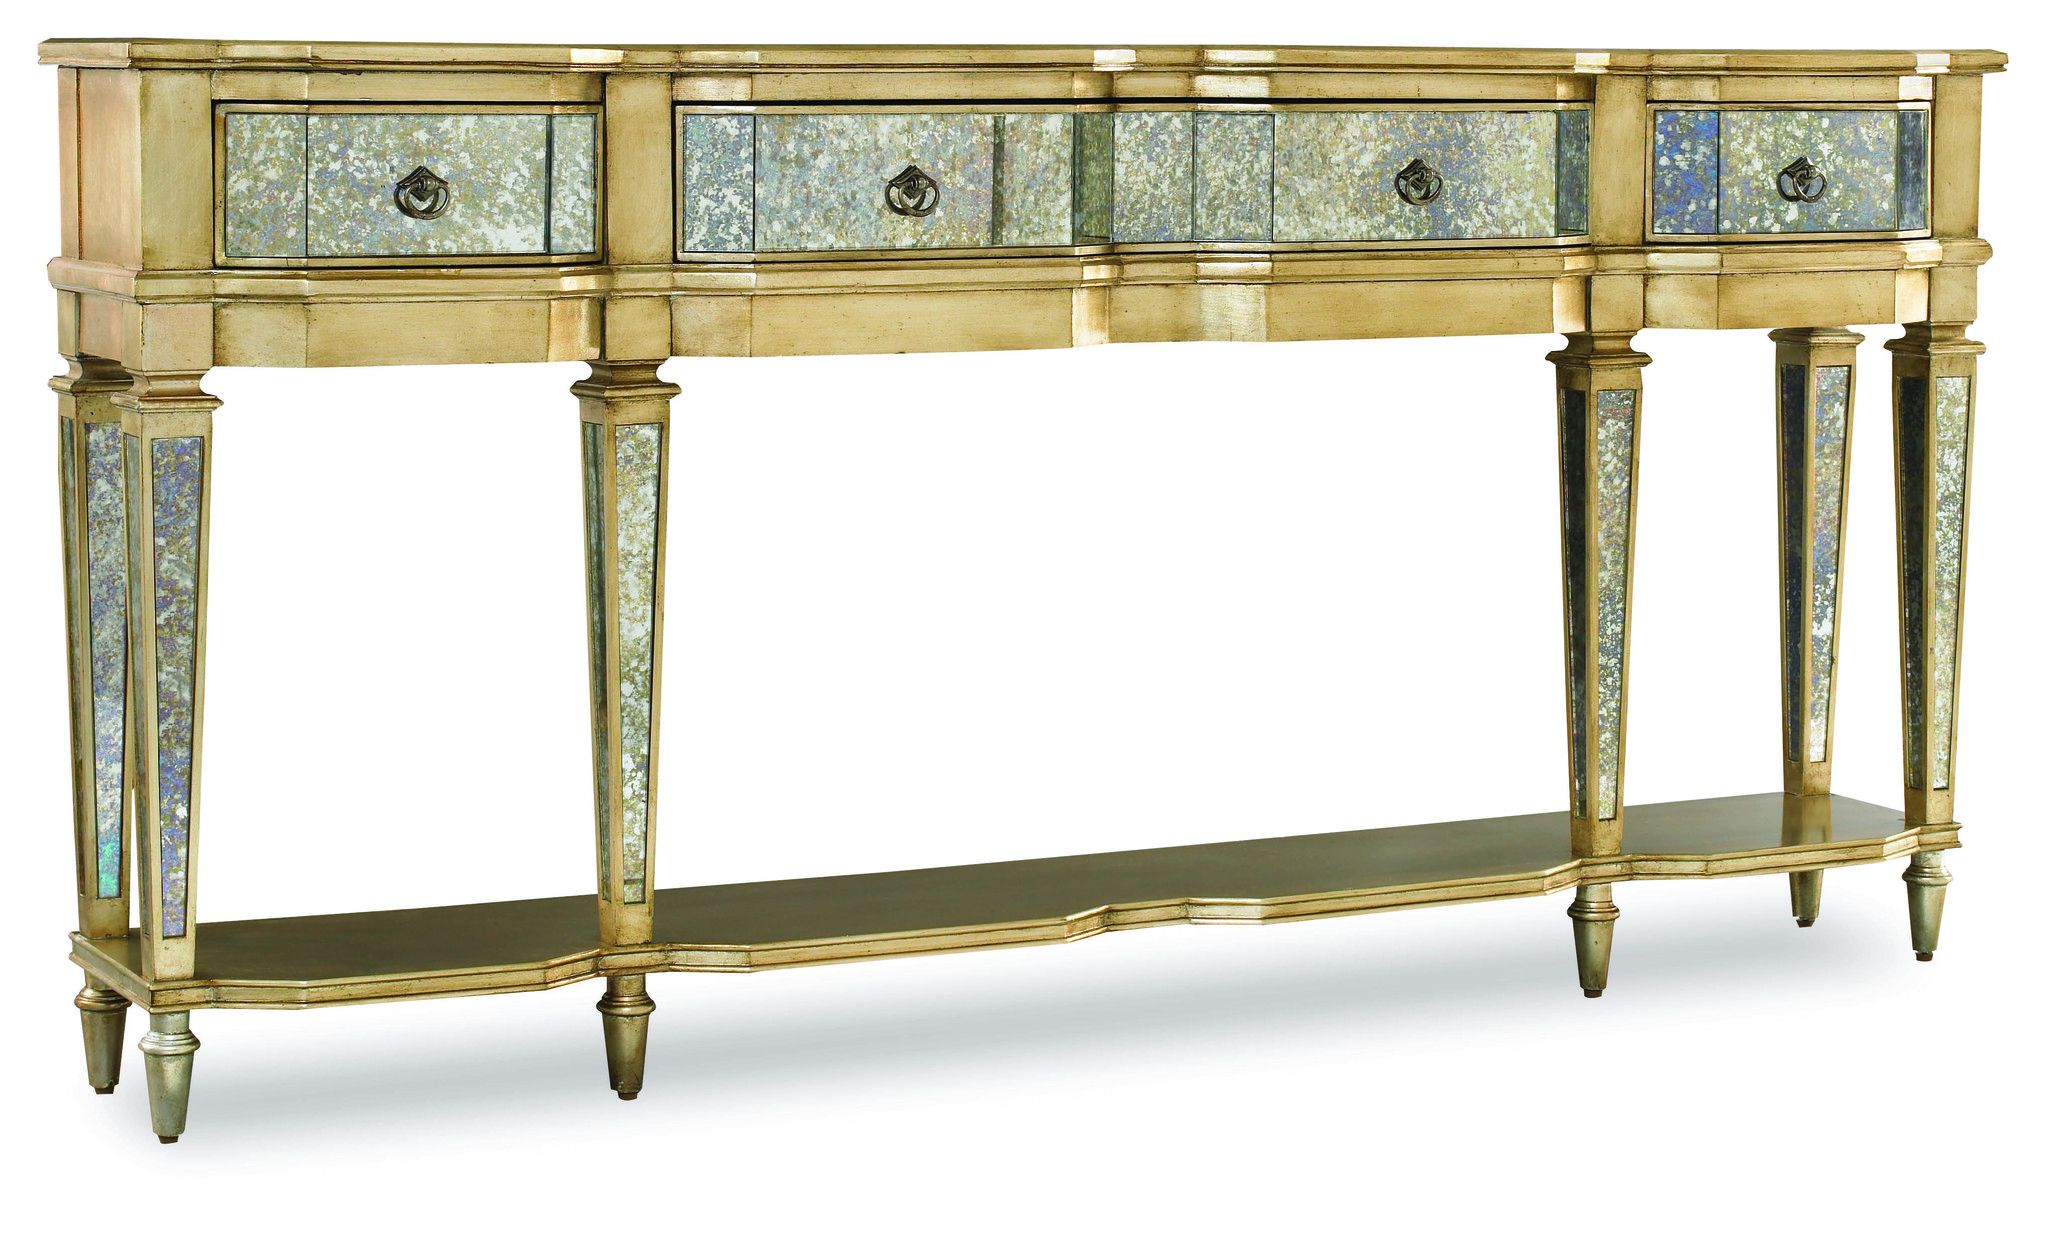 The Sanctuary Antique Mirror & Gold Consolehooker Pertaining To Antiqued Gold Rectangular Console Tables (View 8 of 20)